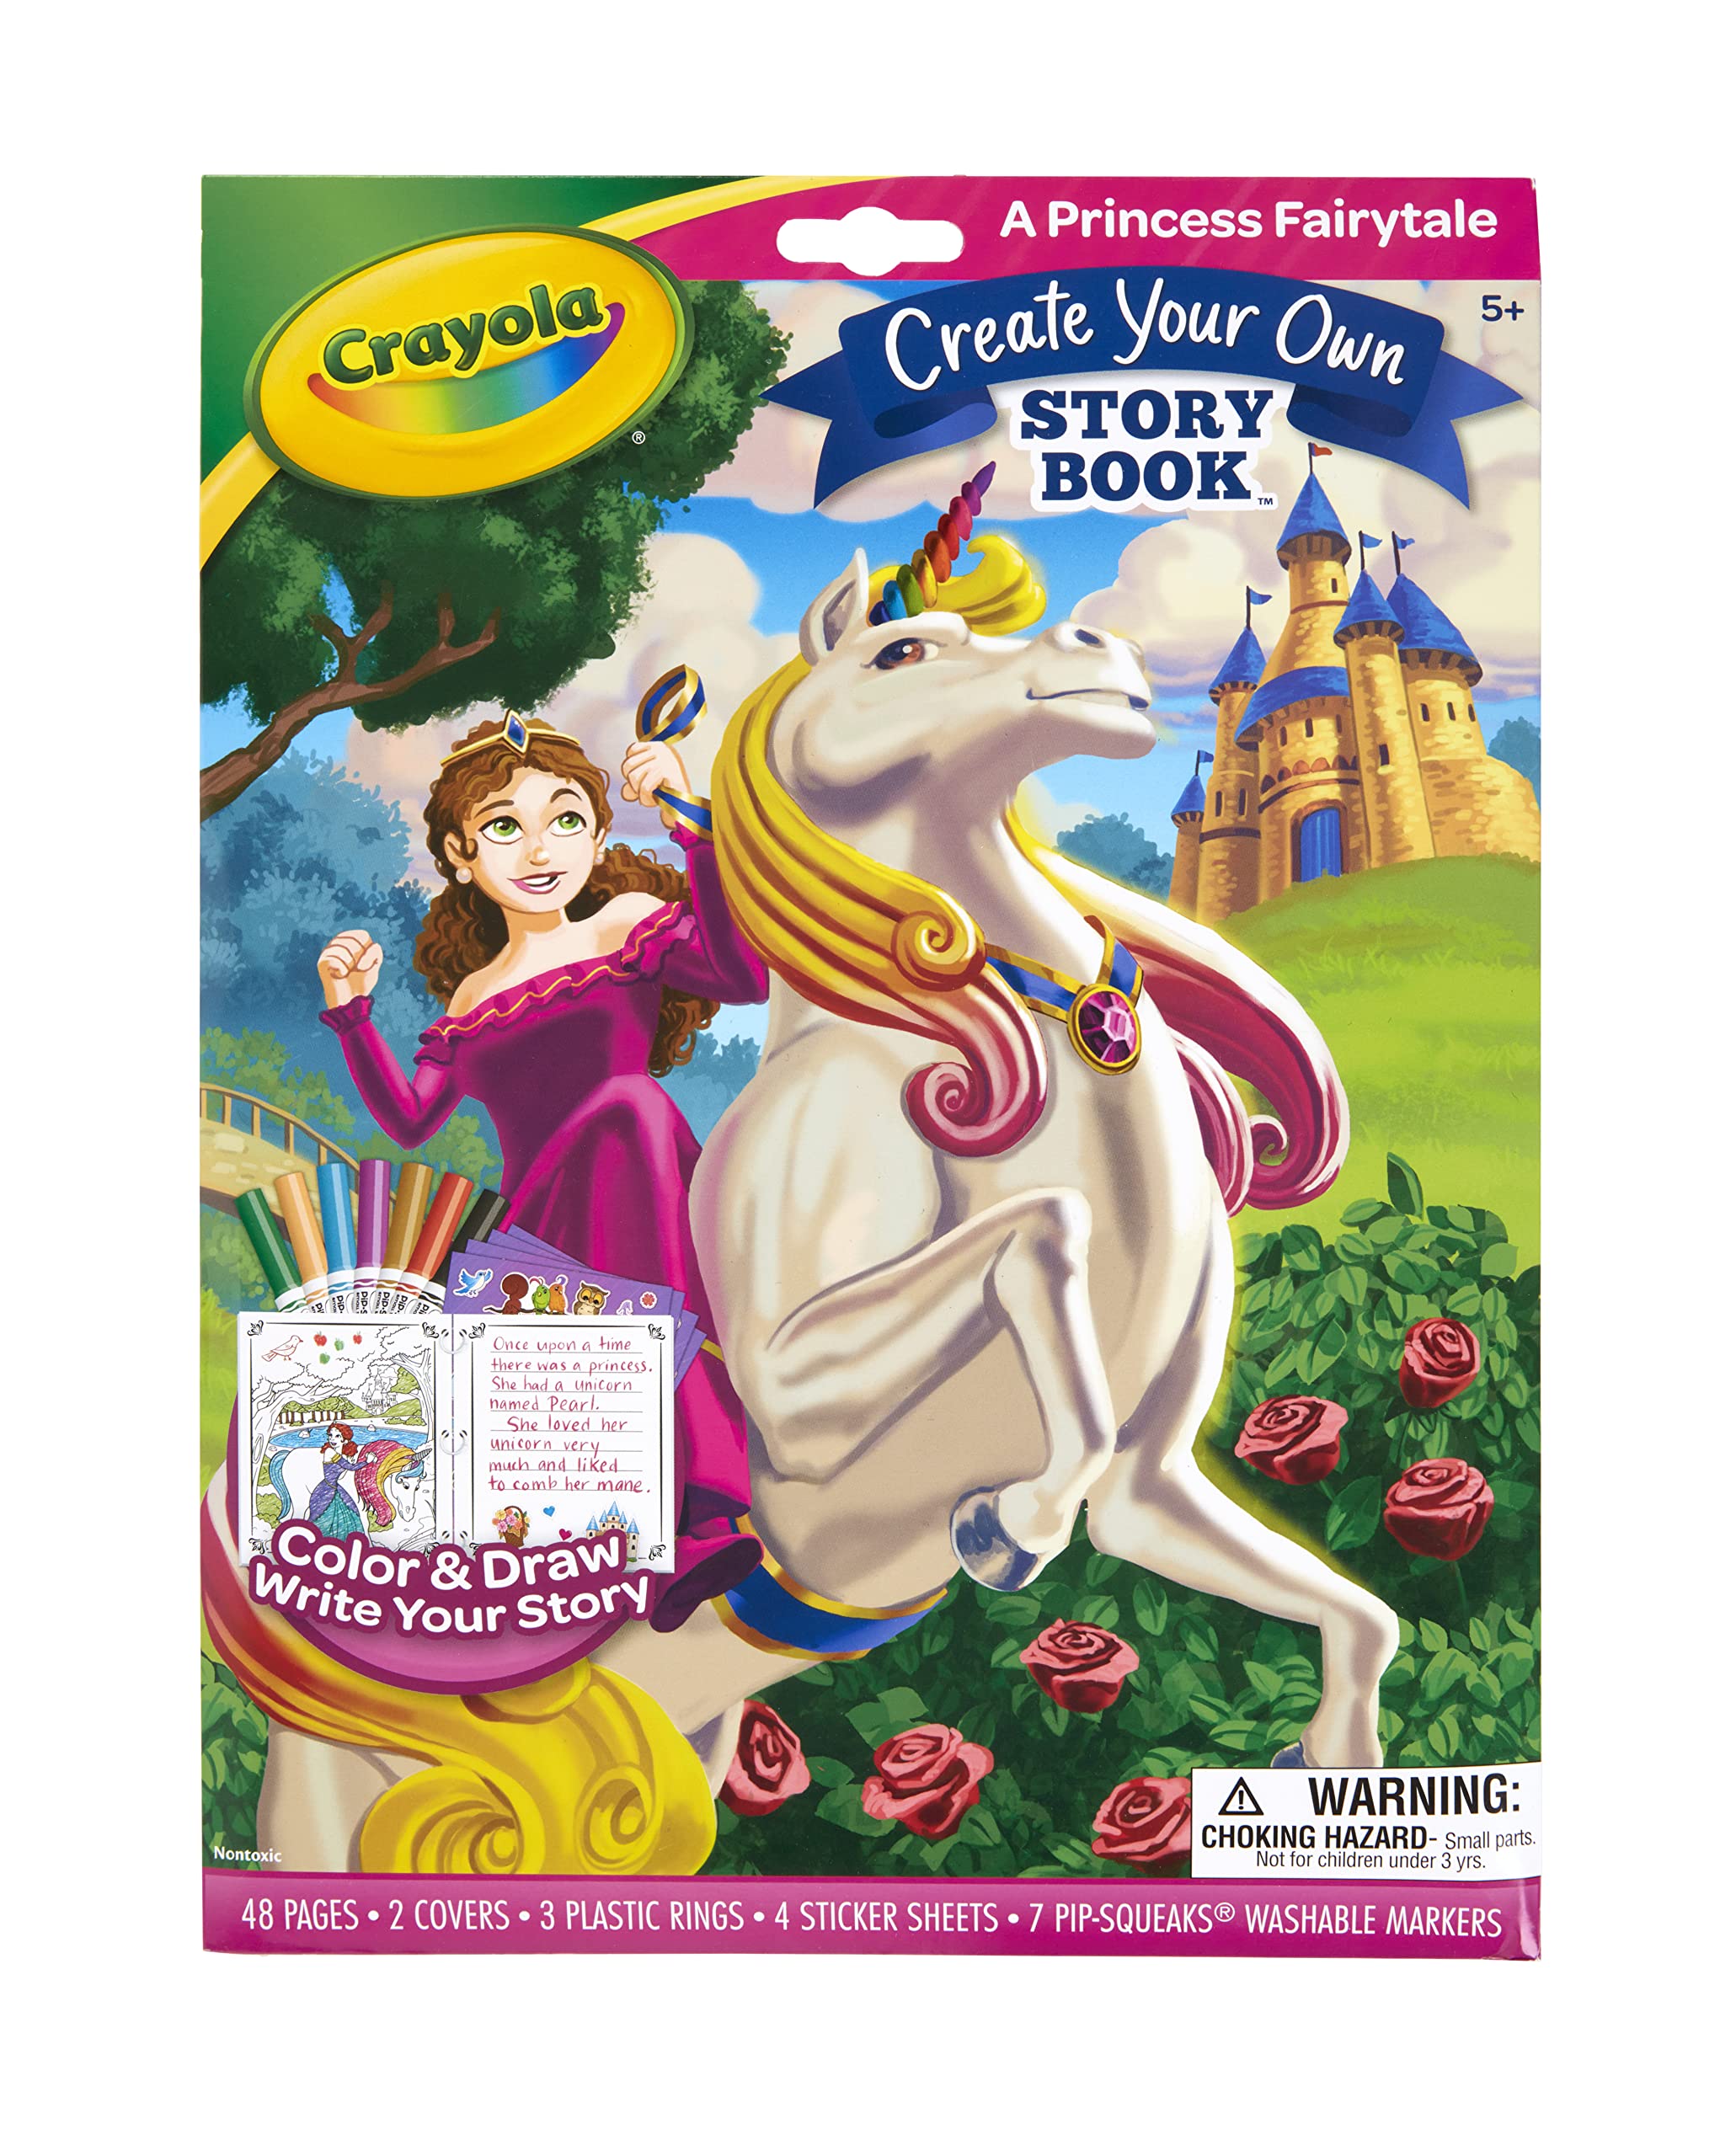 Crayola Book Making Kit for Kids, Fairytale Storybook, DIY Kits for Girls & Boys, Ages 6, 7, 8, 9